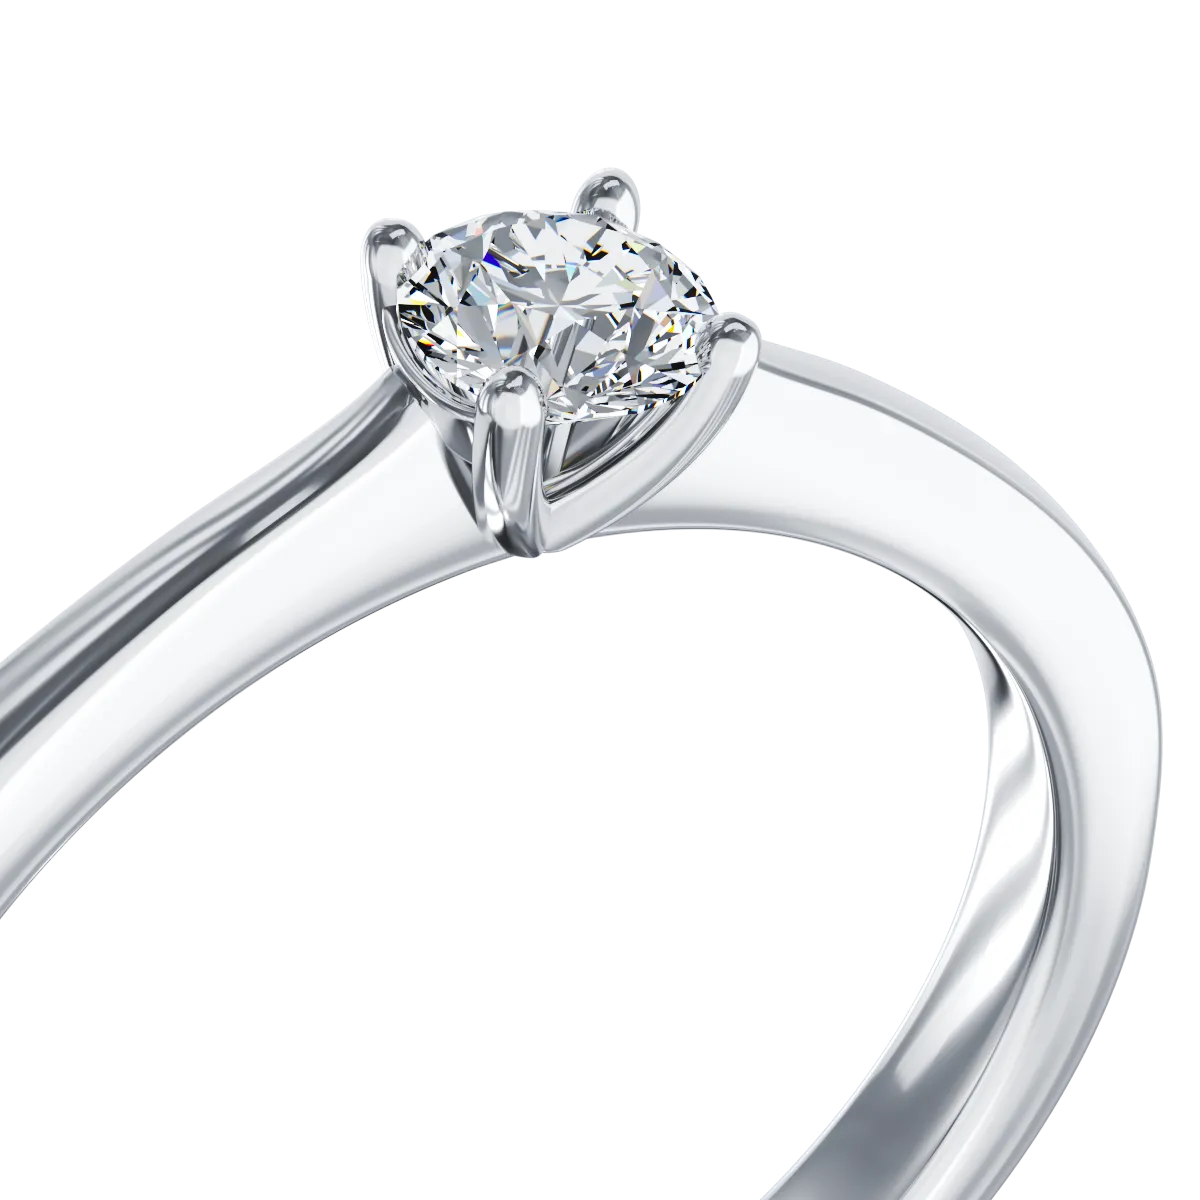 18K white gold engagement ring with 0.205ct diamond